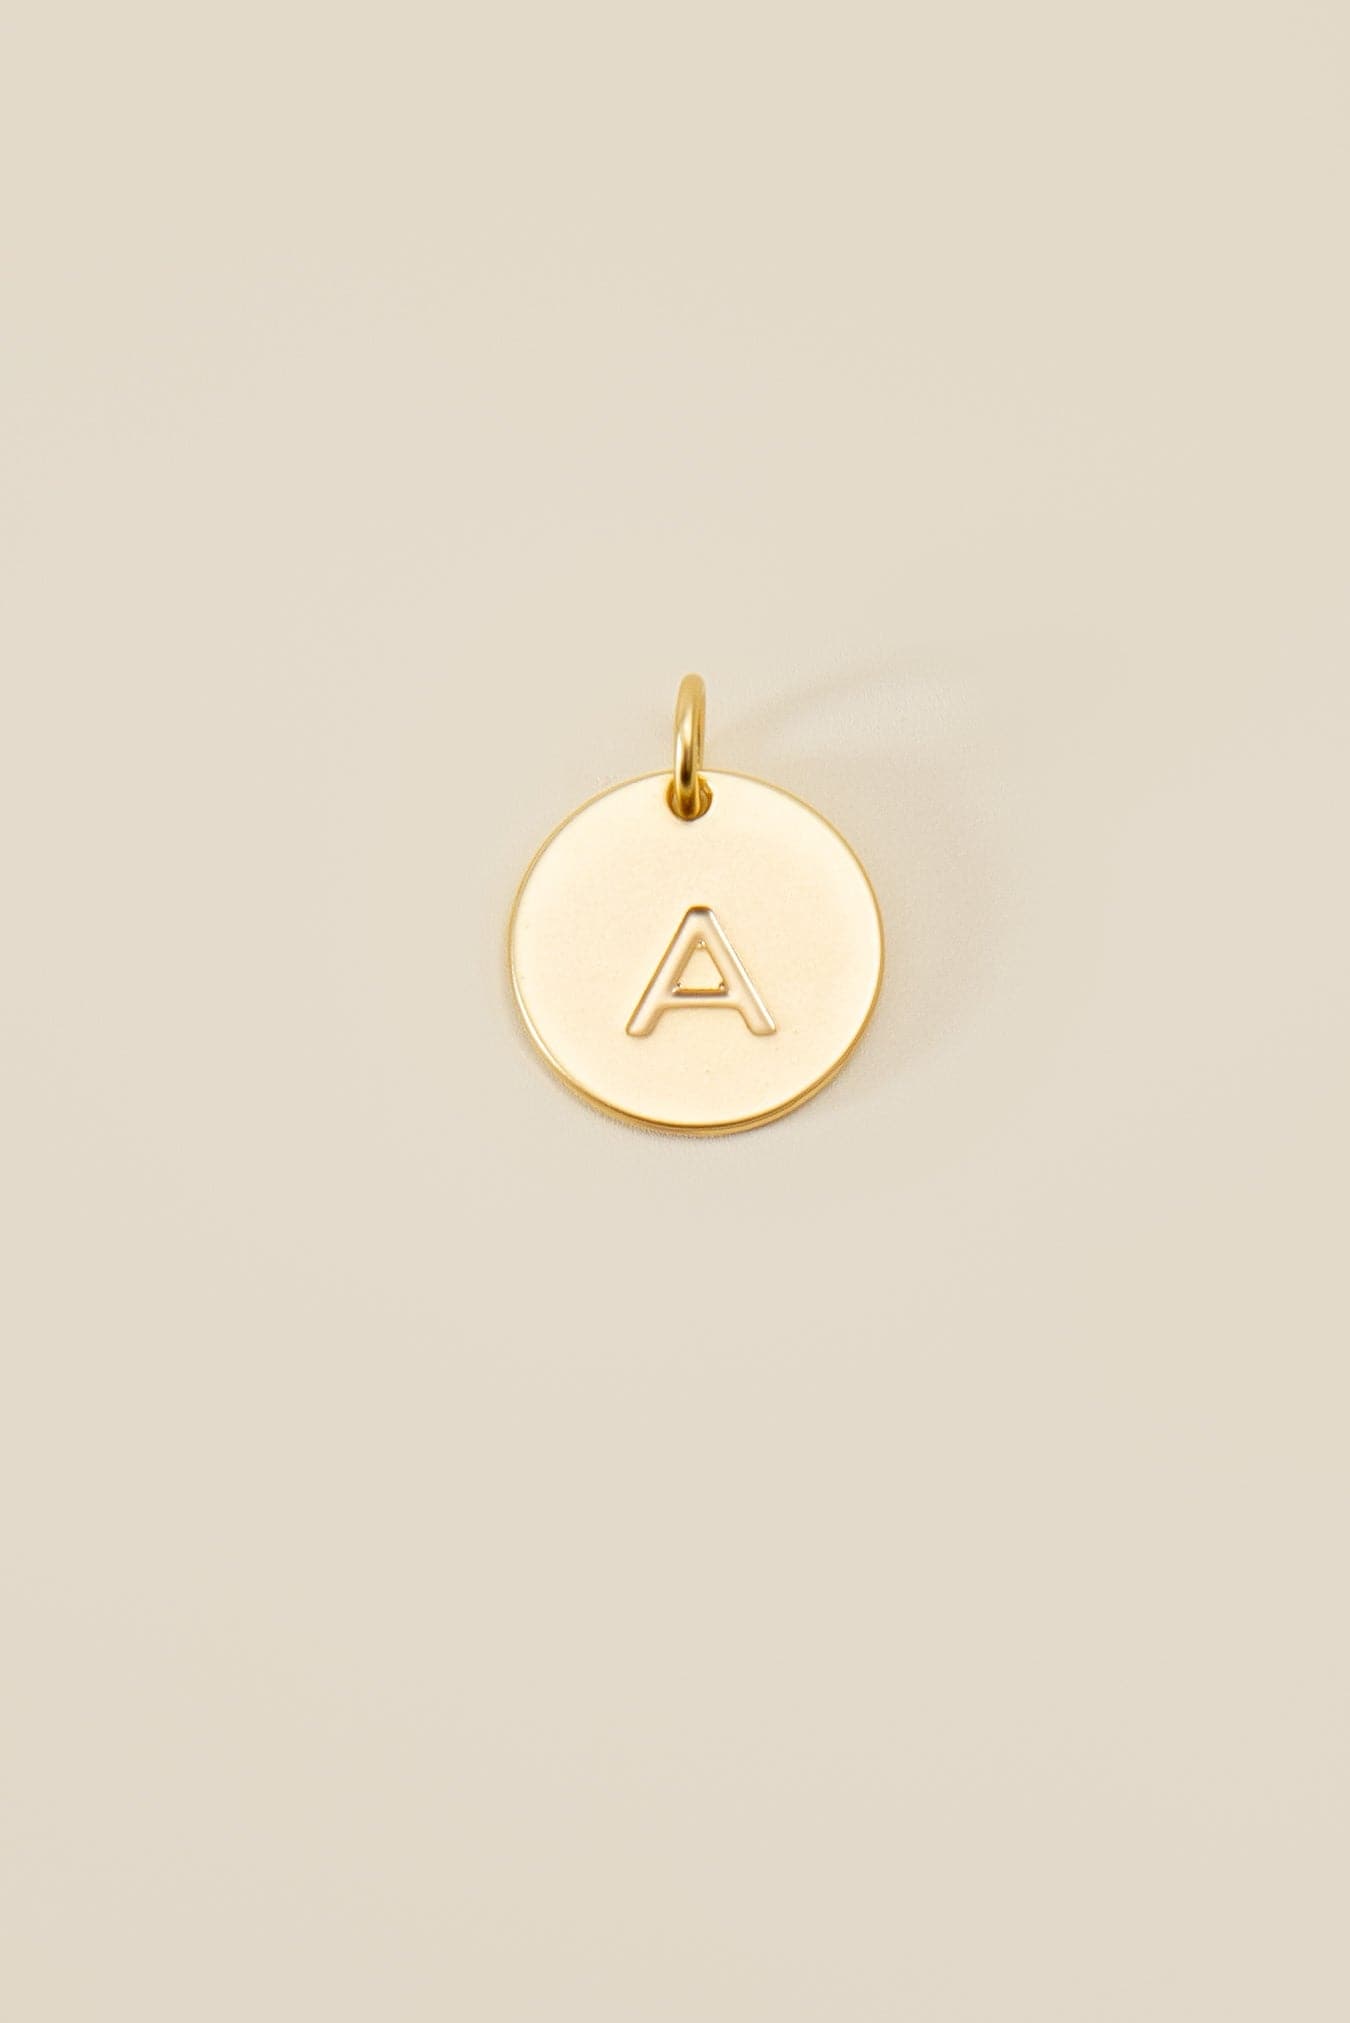 Large Letter Disk Pendant WOMEN'S JEWELRY Cove Matte Gold A 